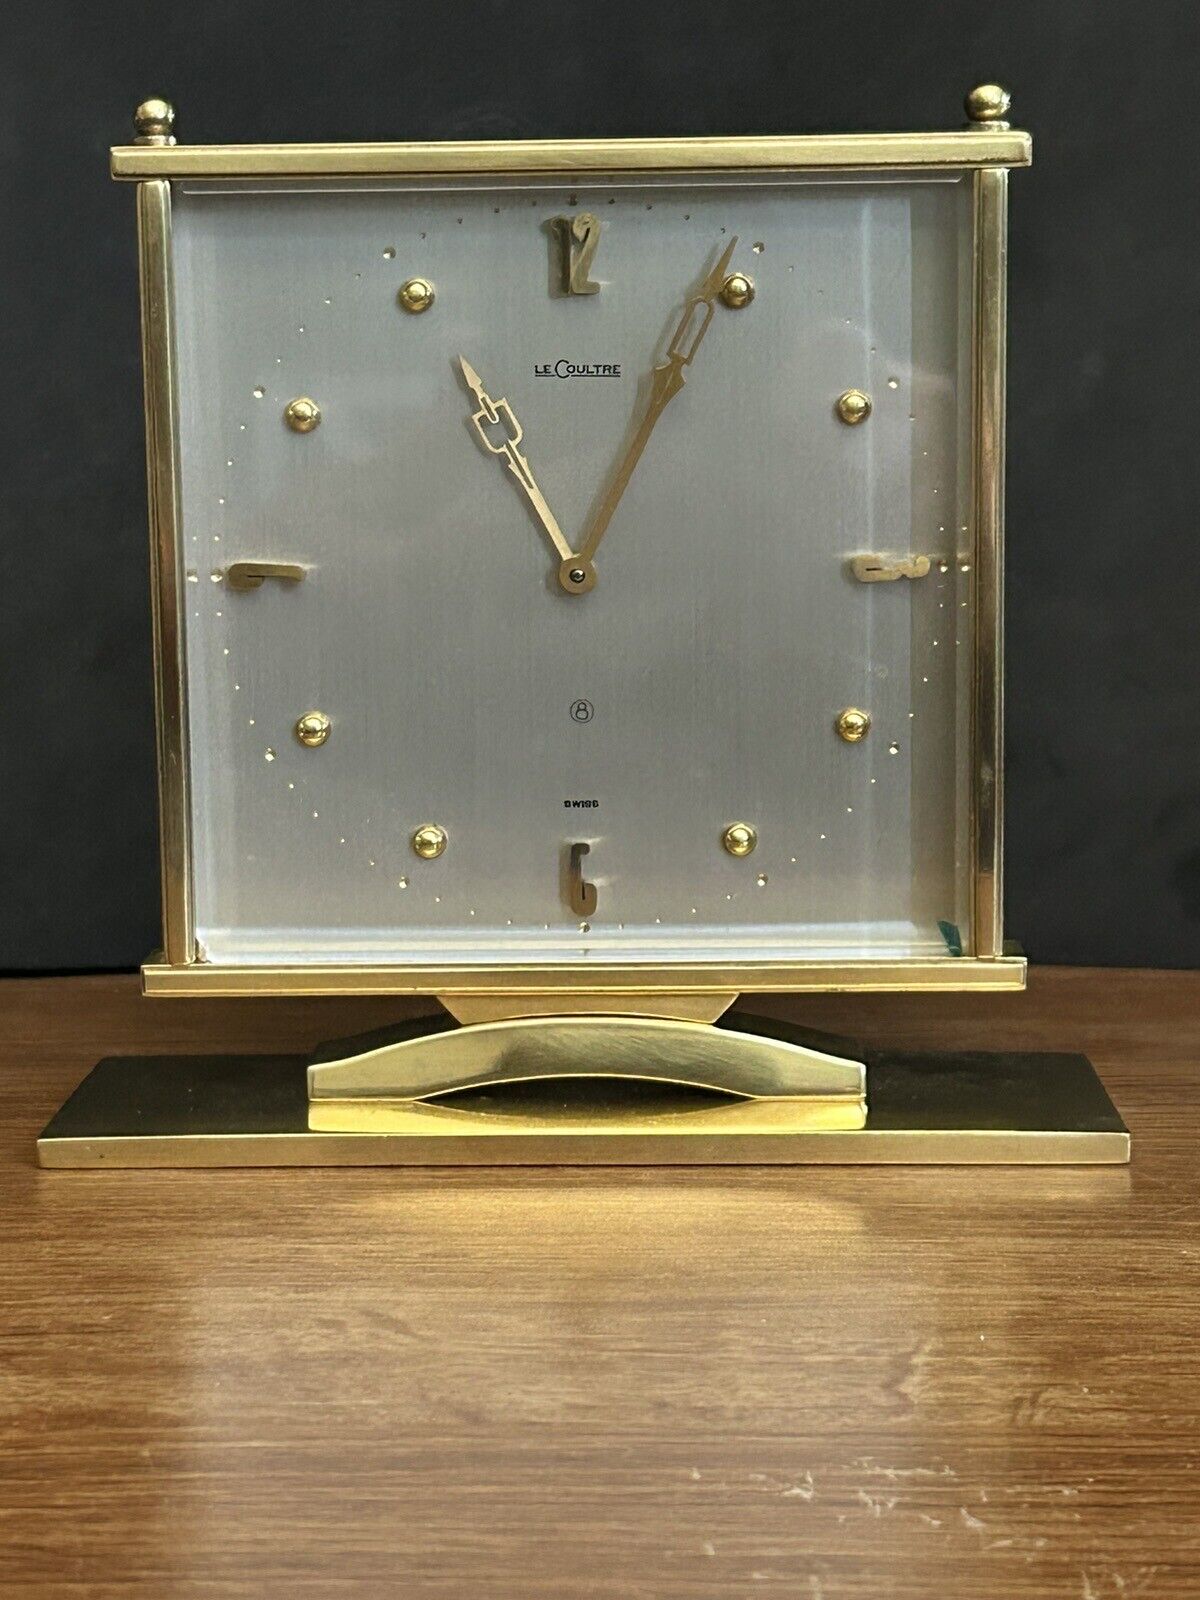 Le Coultre Rare Swiss Made Desk Clock.  8 day Movement.  Gold Plated